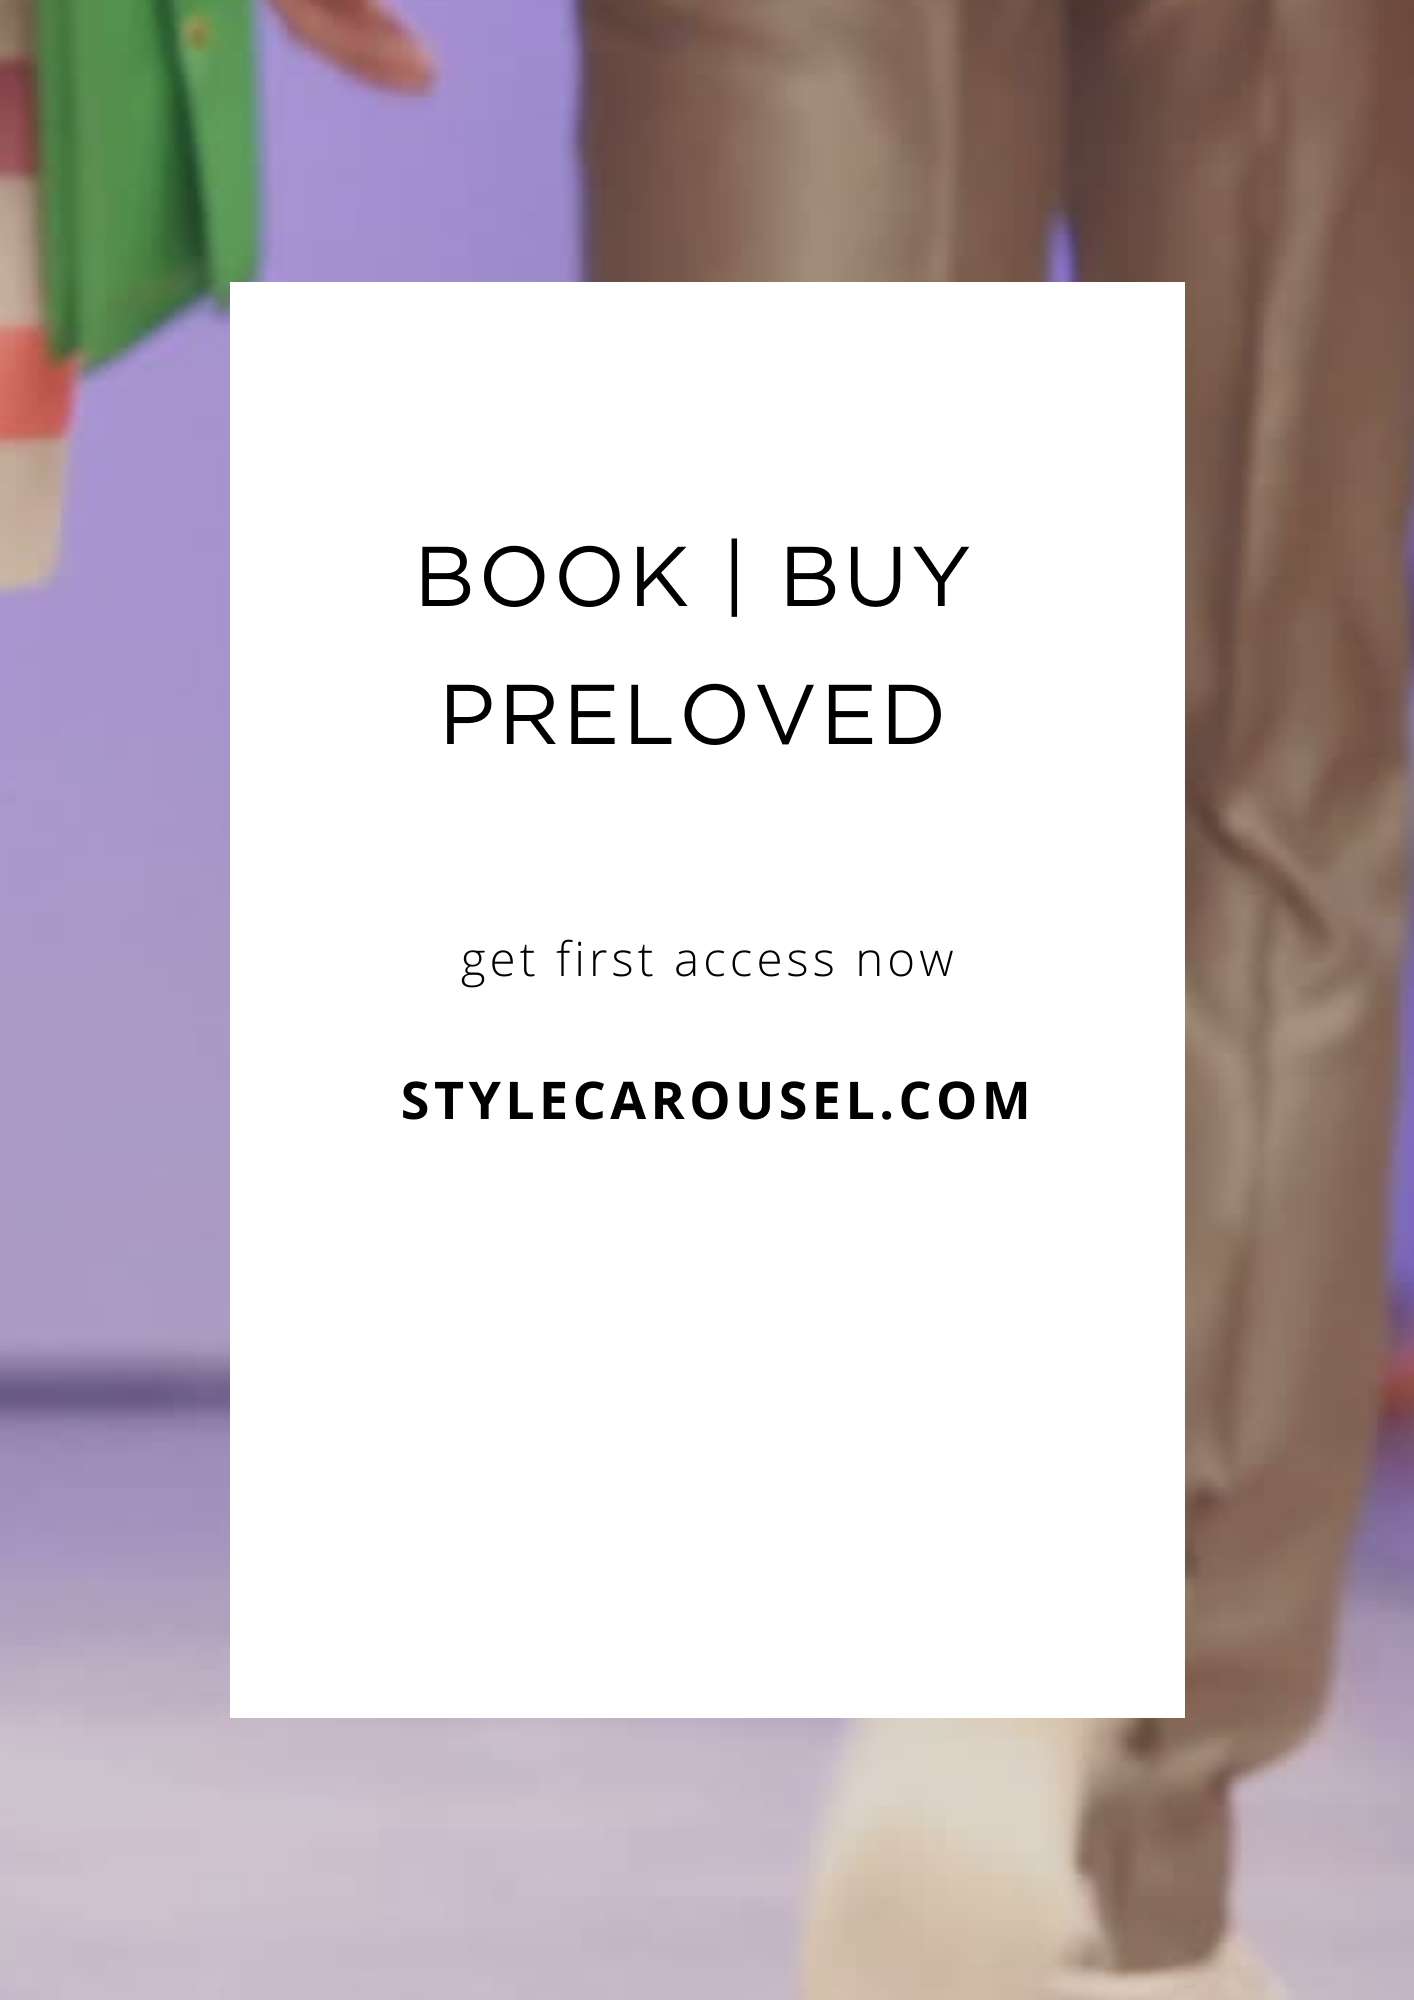 BOOK, BUY, PRELOVED With Style Carousel